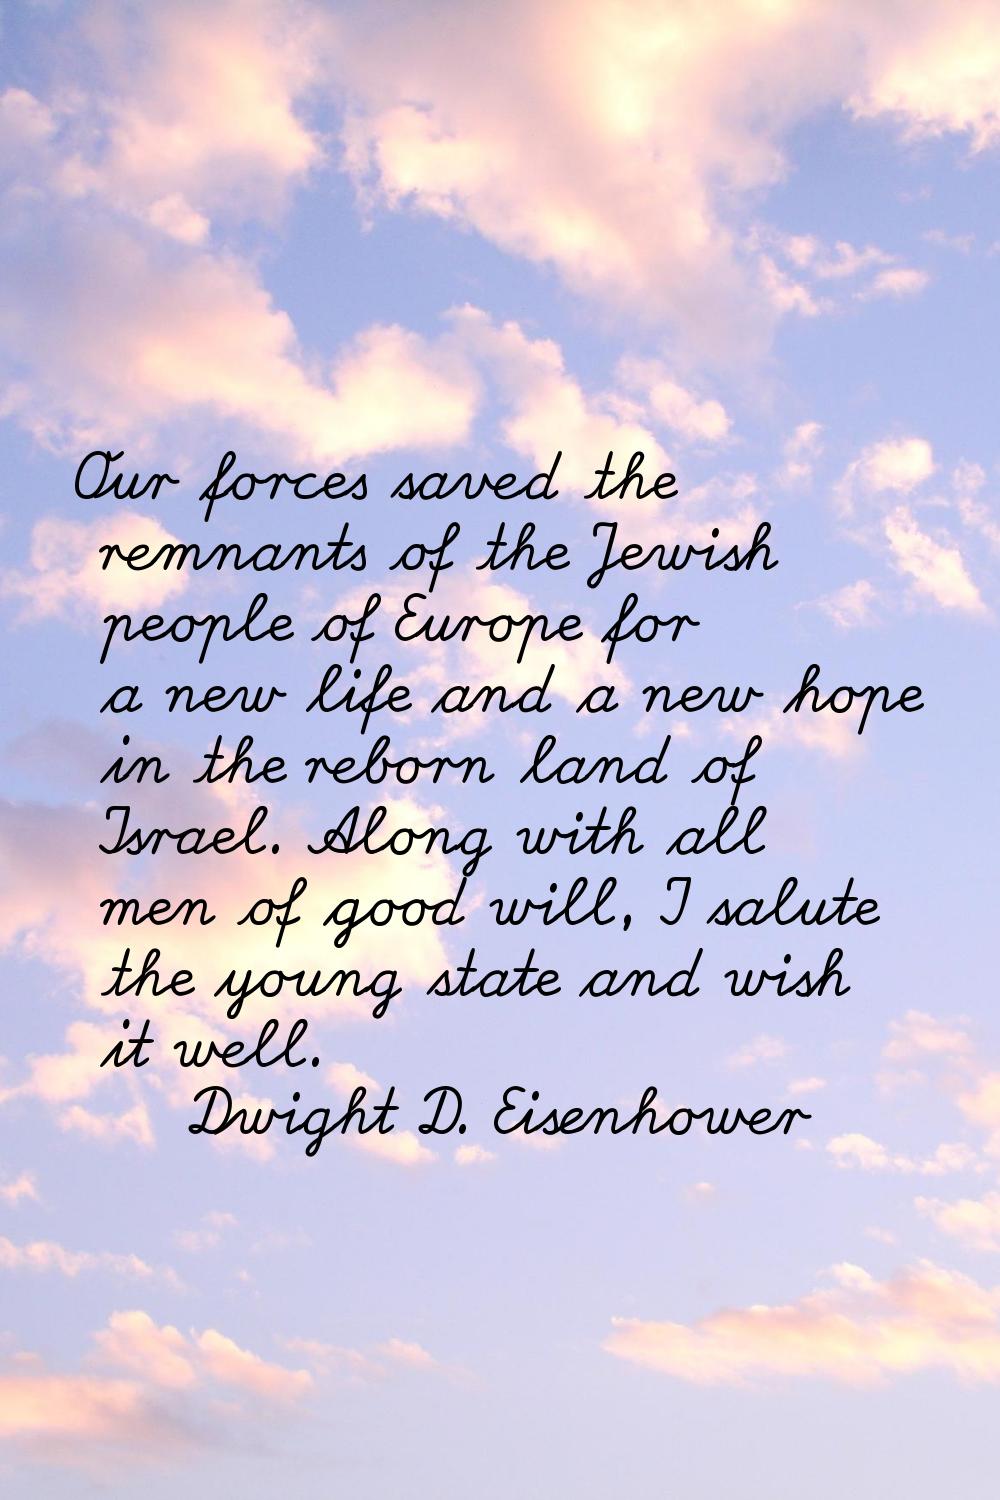 Our forces saved the remnants of the Jewish people of Europe for a new life and a new hope in the r